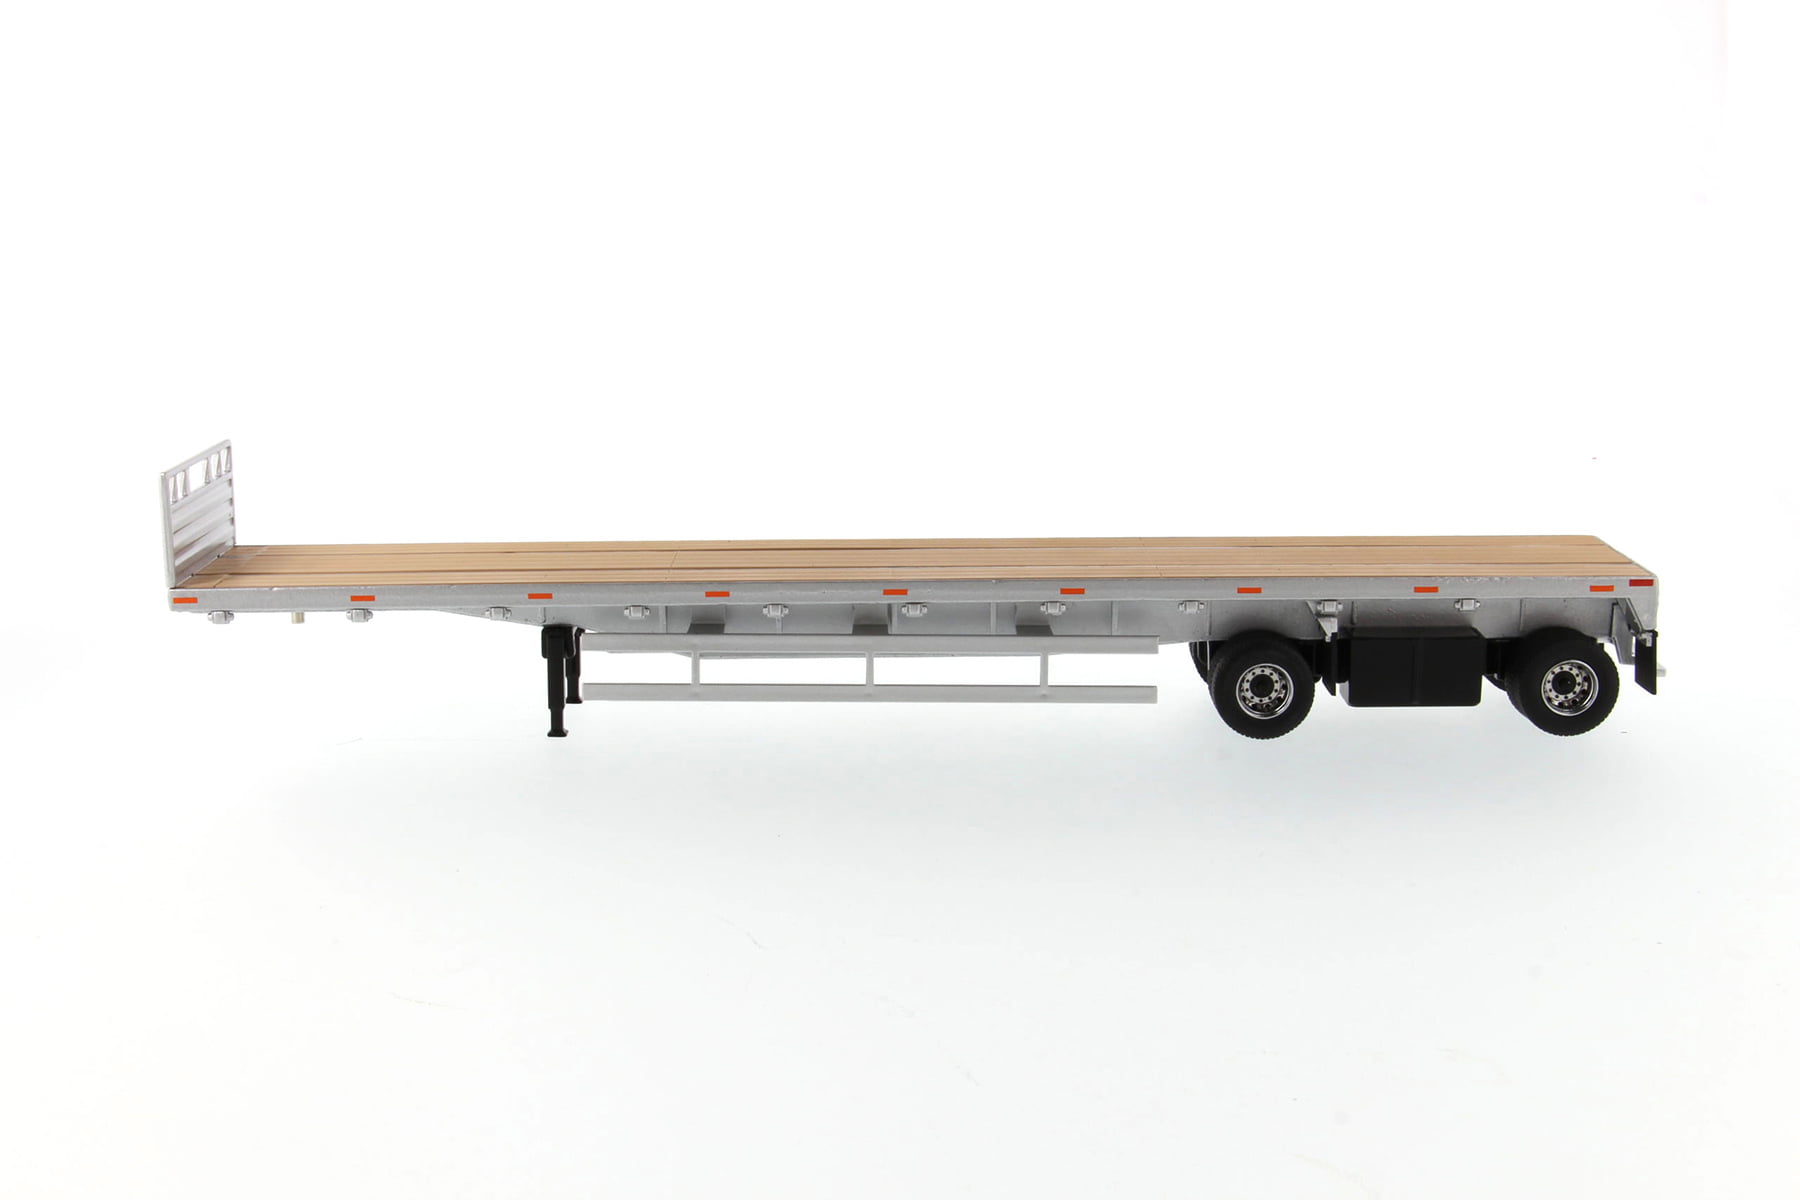 53' FLAT BED TRAILER SILVER 1/50 DIECAST MODEL BY DIECAST MASTERS 91023 